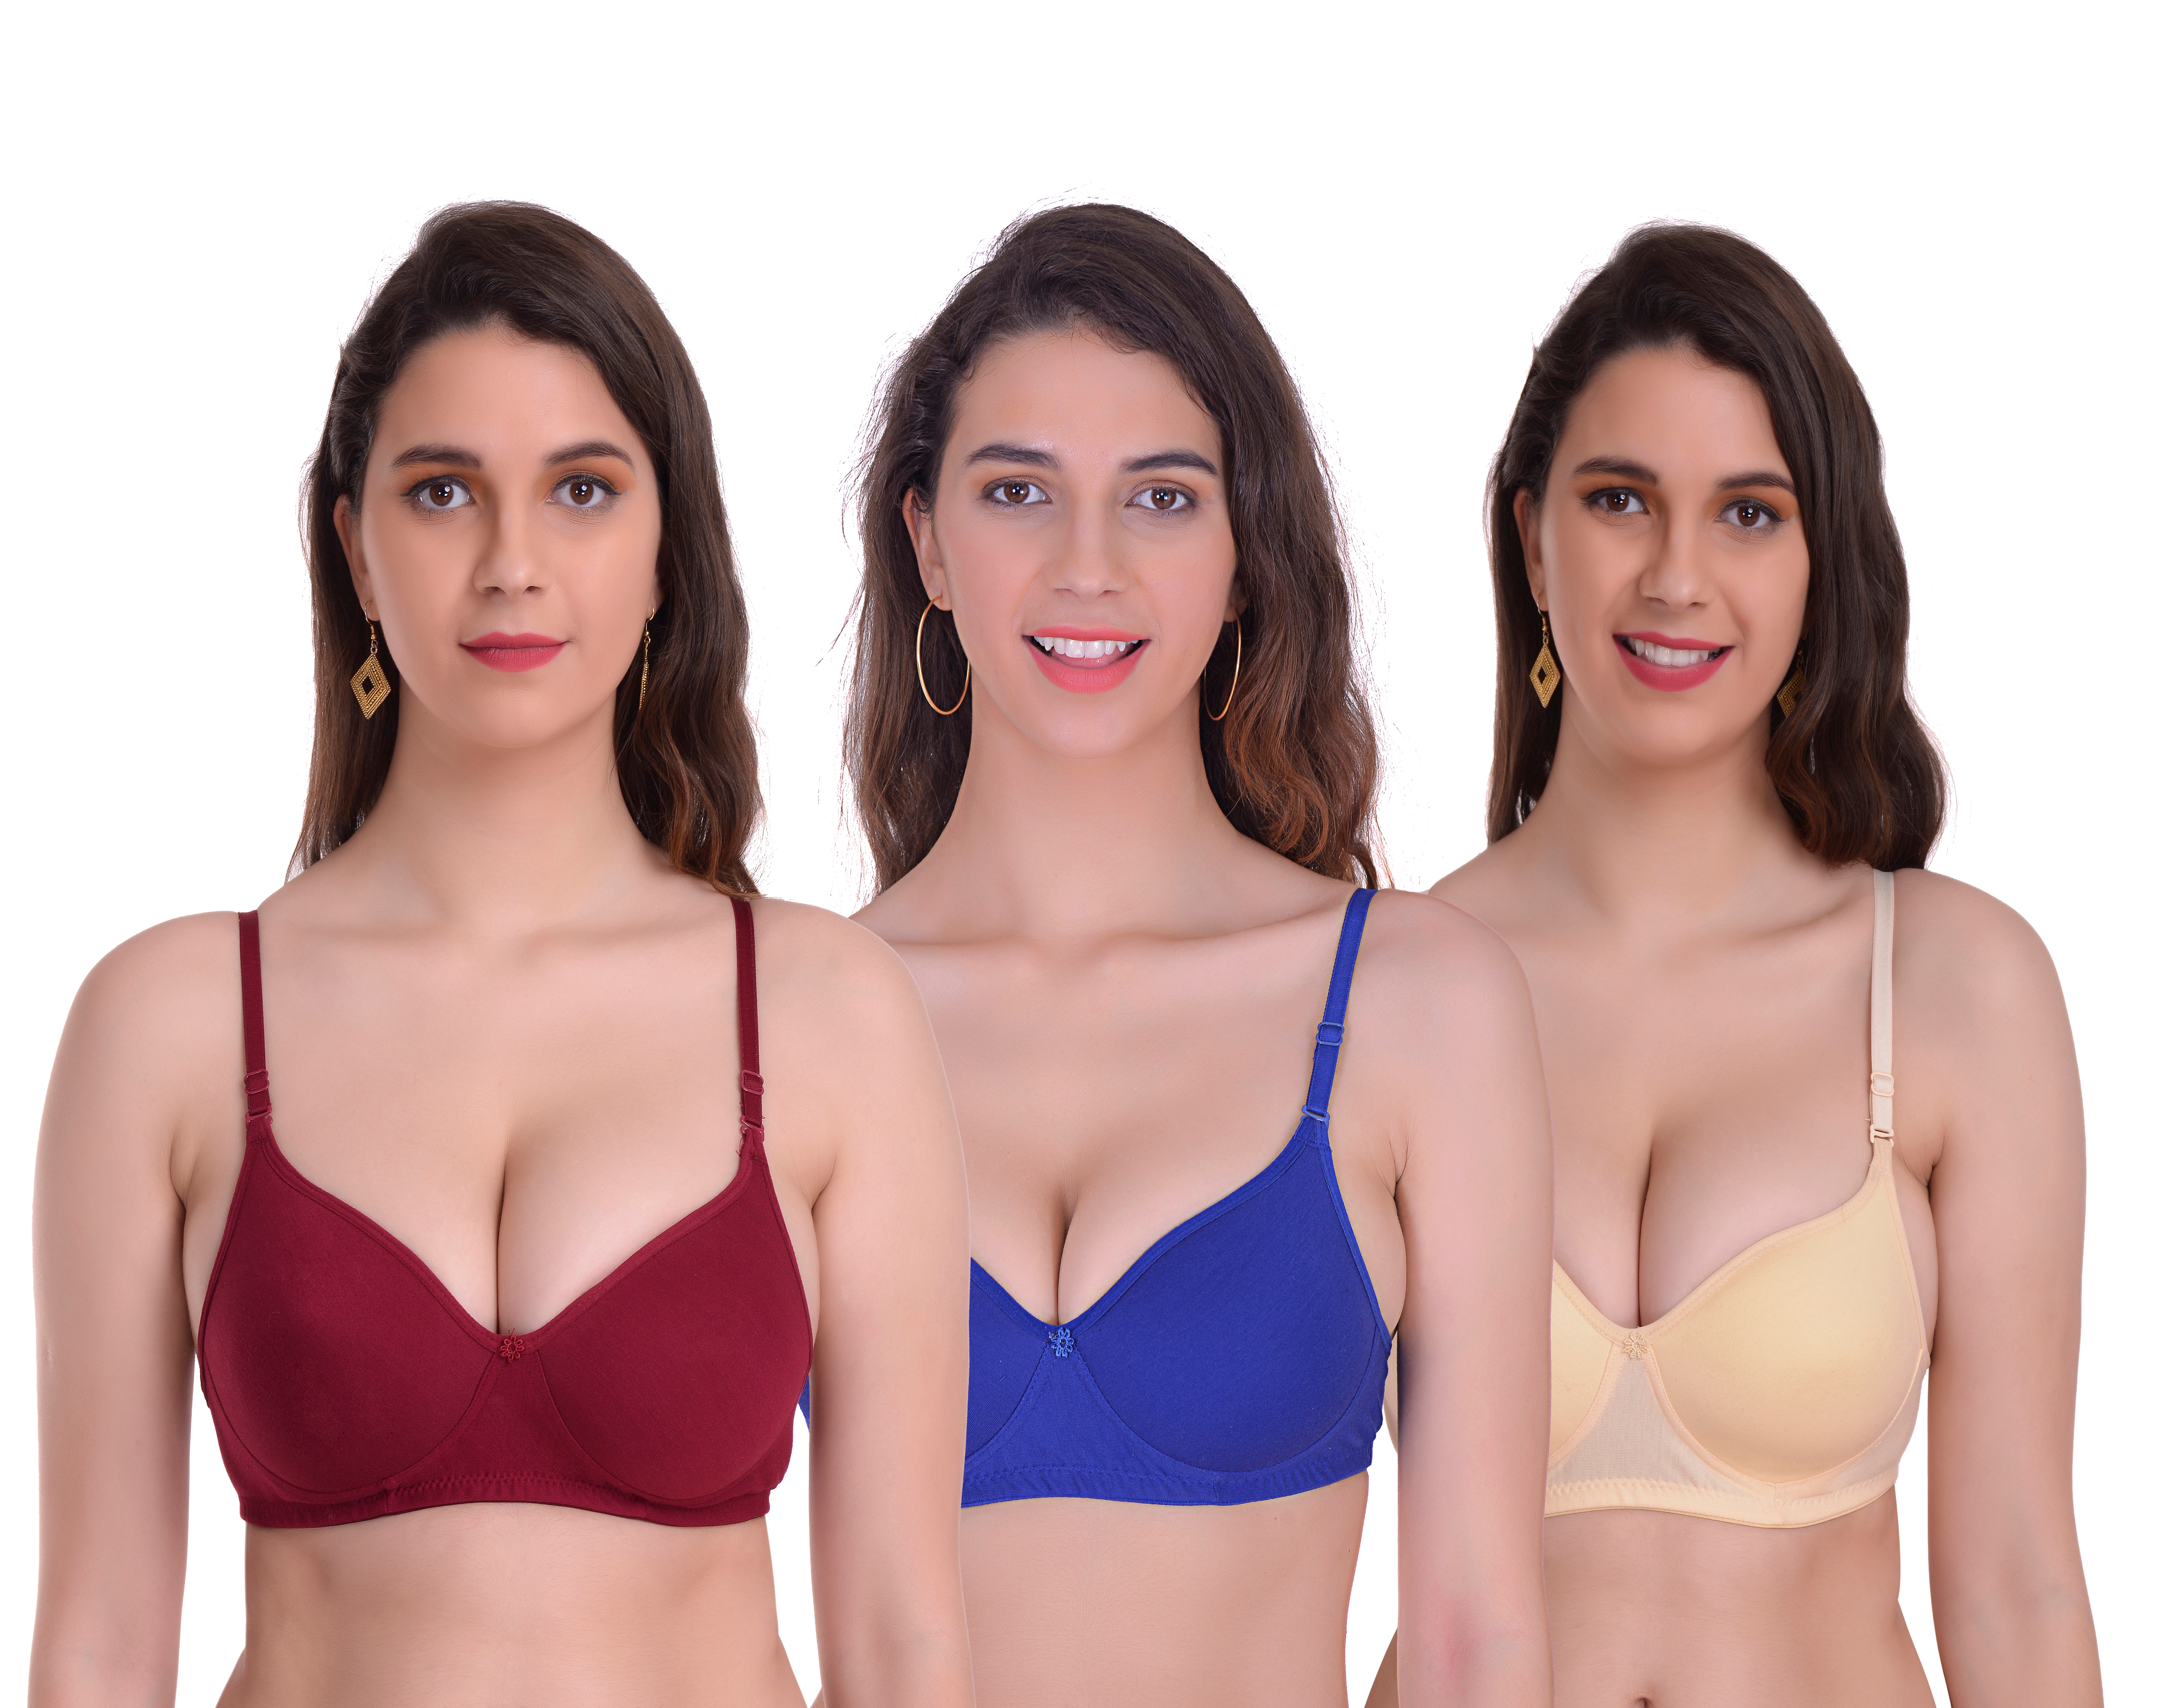 Mynte | Mynte Women's Cotton Rich Lightly Padded Non-Wired Full Cup Regular Bra (Pack of 3) (Maroon/Blue/Yellow,30) (MY-CPPB-7MBLY-30)